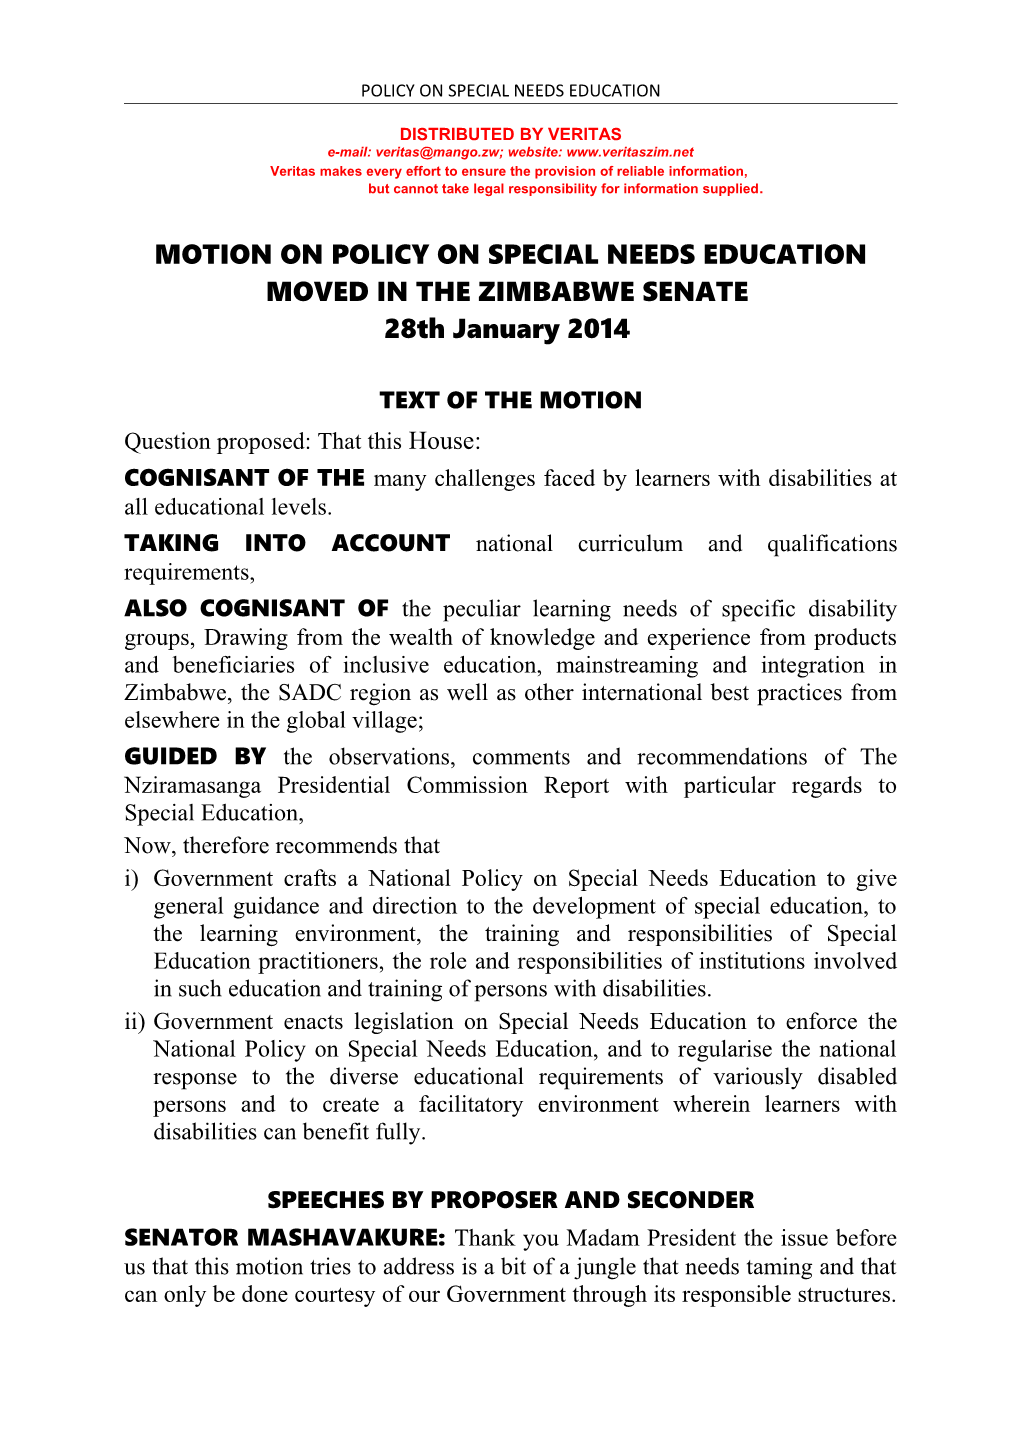 Policy on Special Needs Education